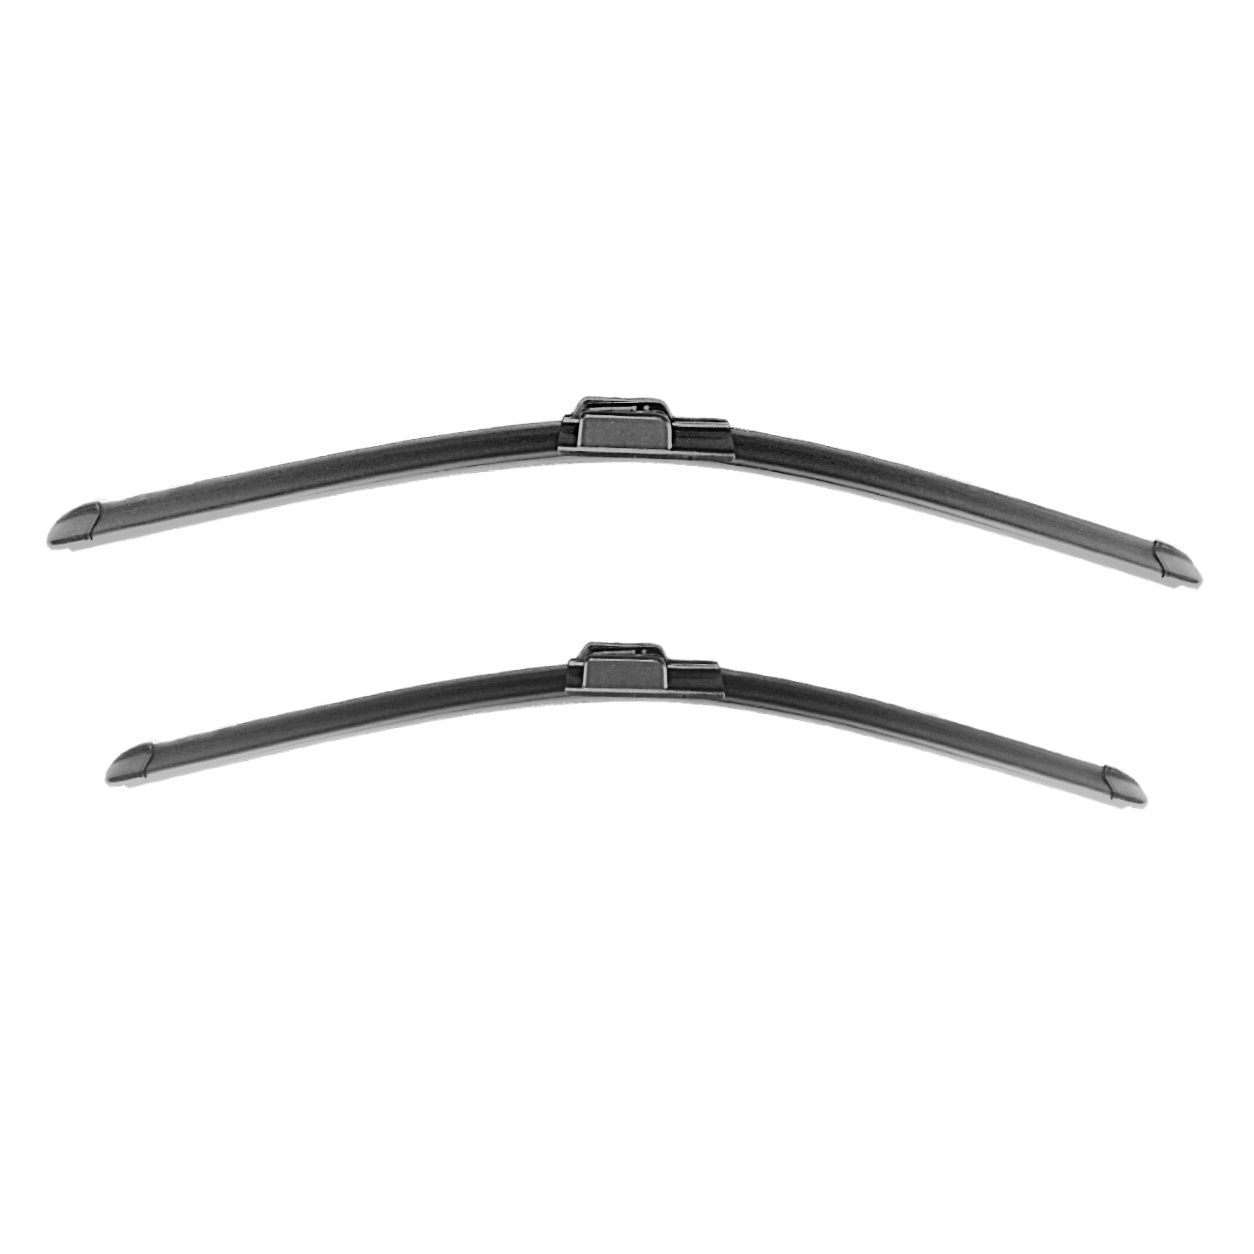 Jeep Grand Cherokee 2011-2018 (WK) Replacement Wiper Blades Refillable 2018 Jeep Grand Cherokee Rear Wiper Blade Replacement